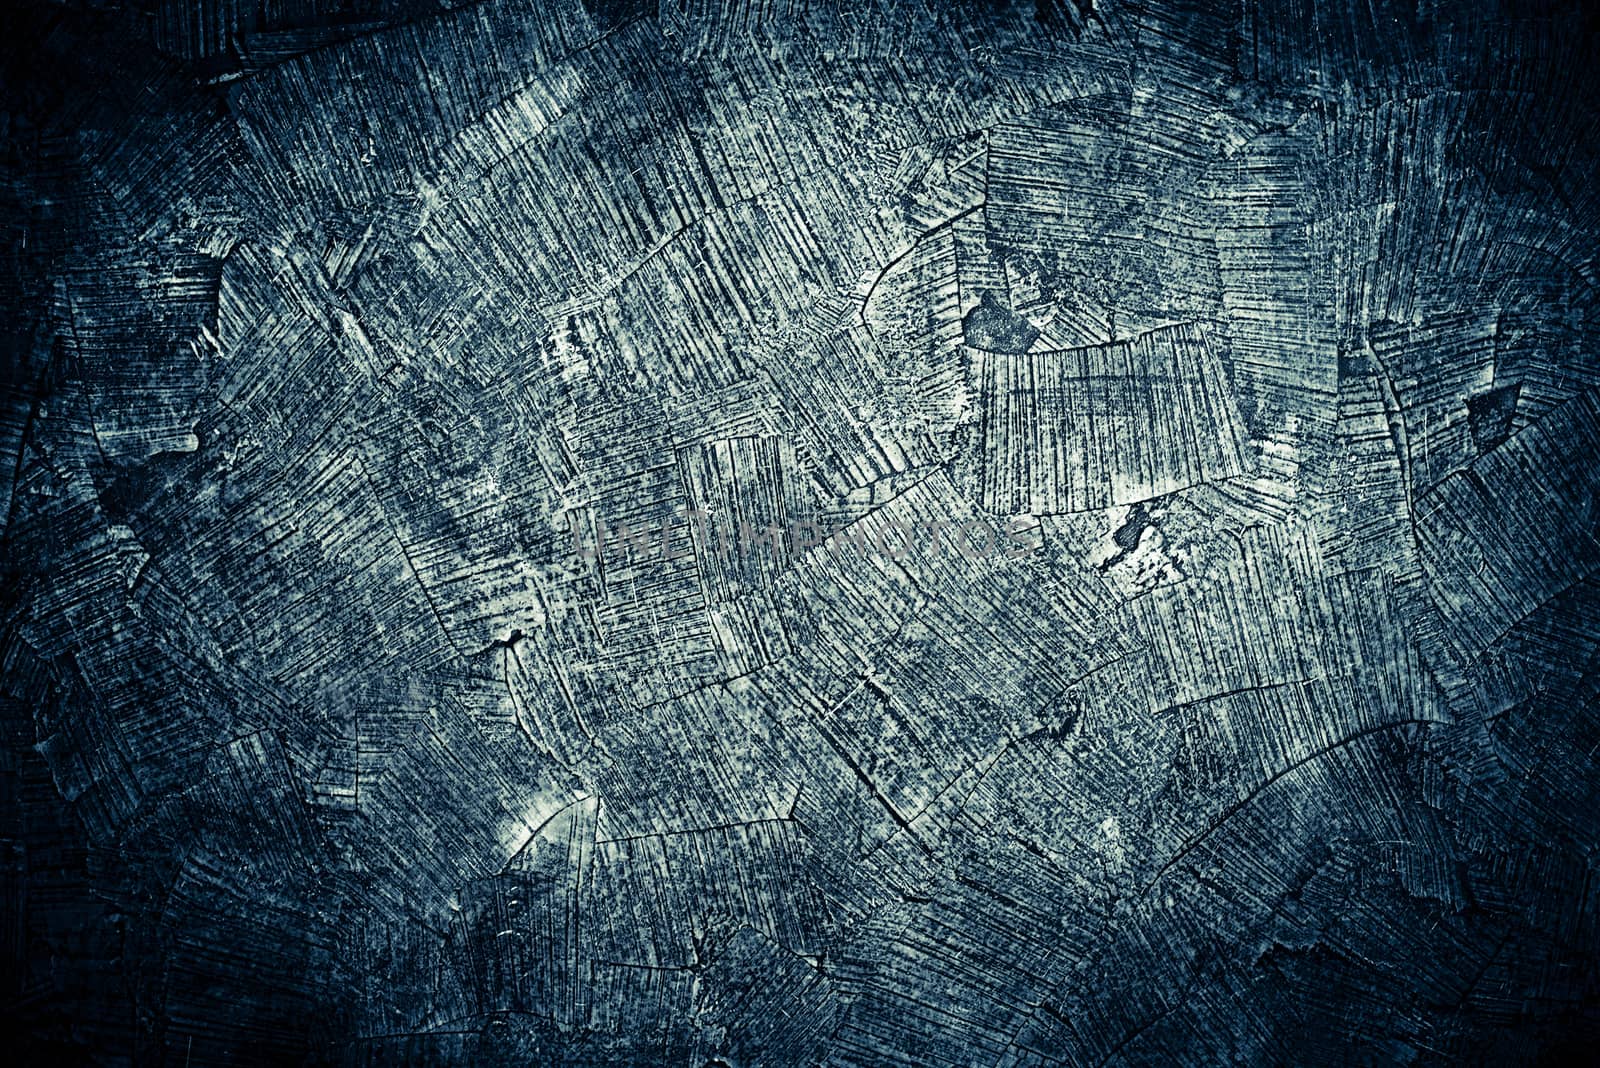 grungy dark textures background by anatskwong